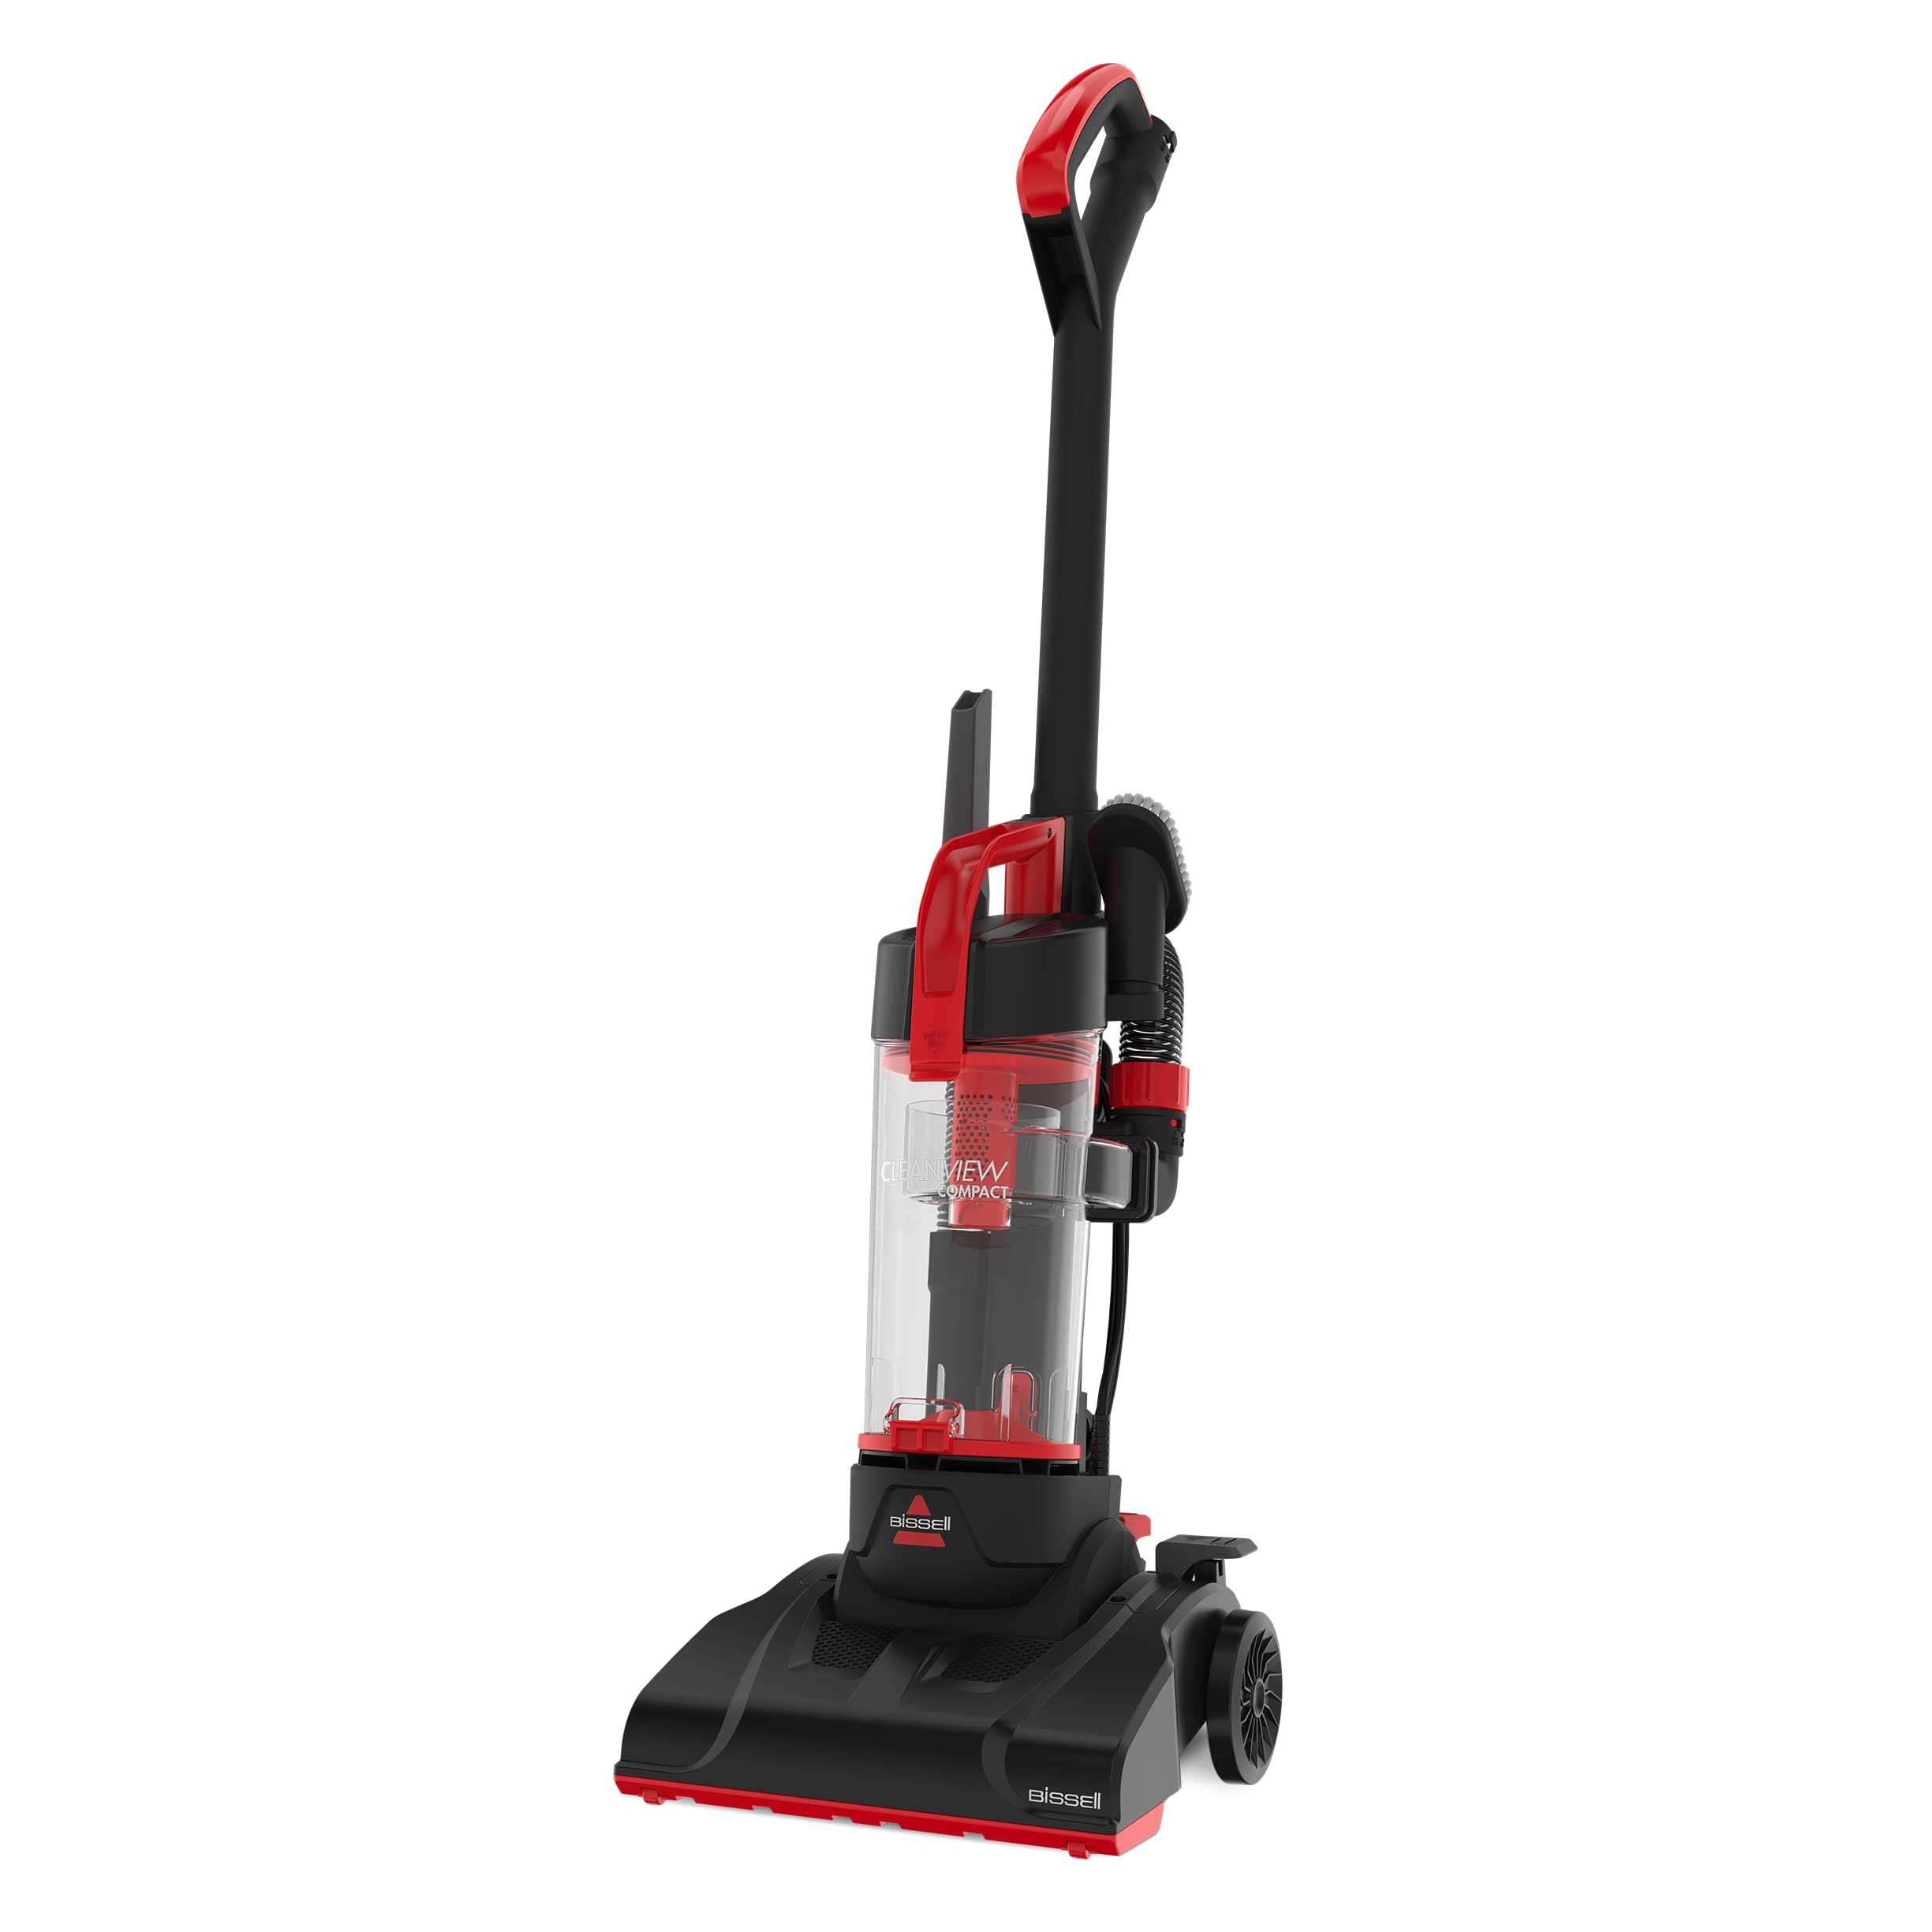 Bissell CleanView Compact Turbo Standstaubsauger